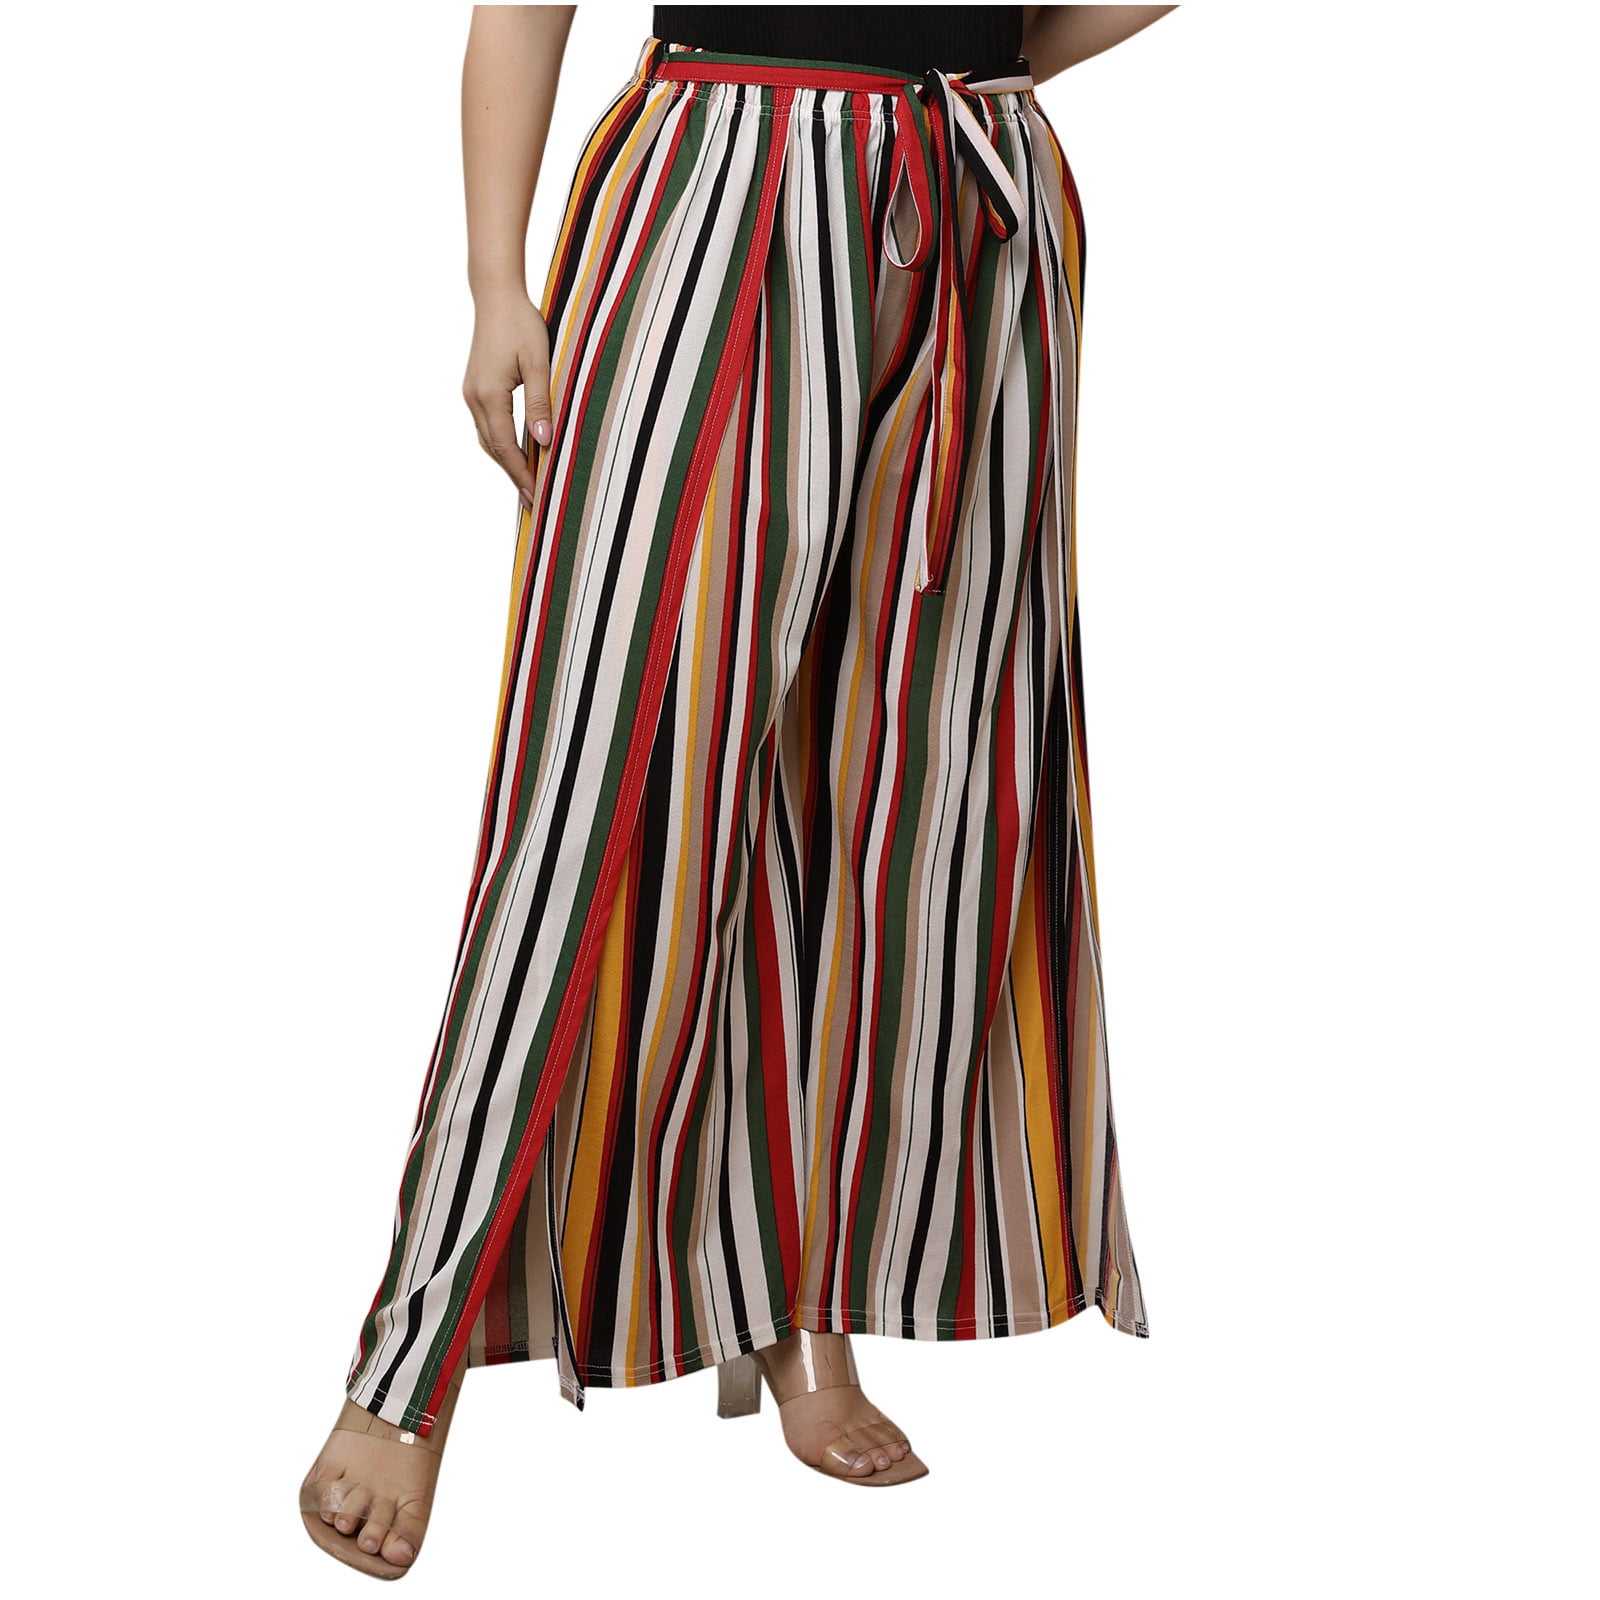 Palazzo Pants, cool wear, summer wear, Spring wear, Trousers, Plus size,  Comfy, stretchy, elastic waist, casual, dress up.